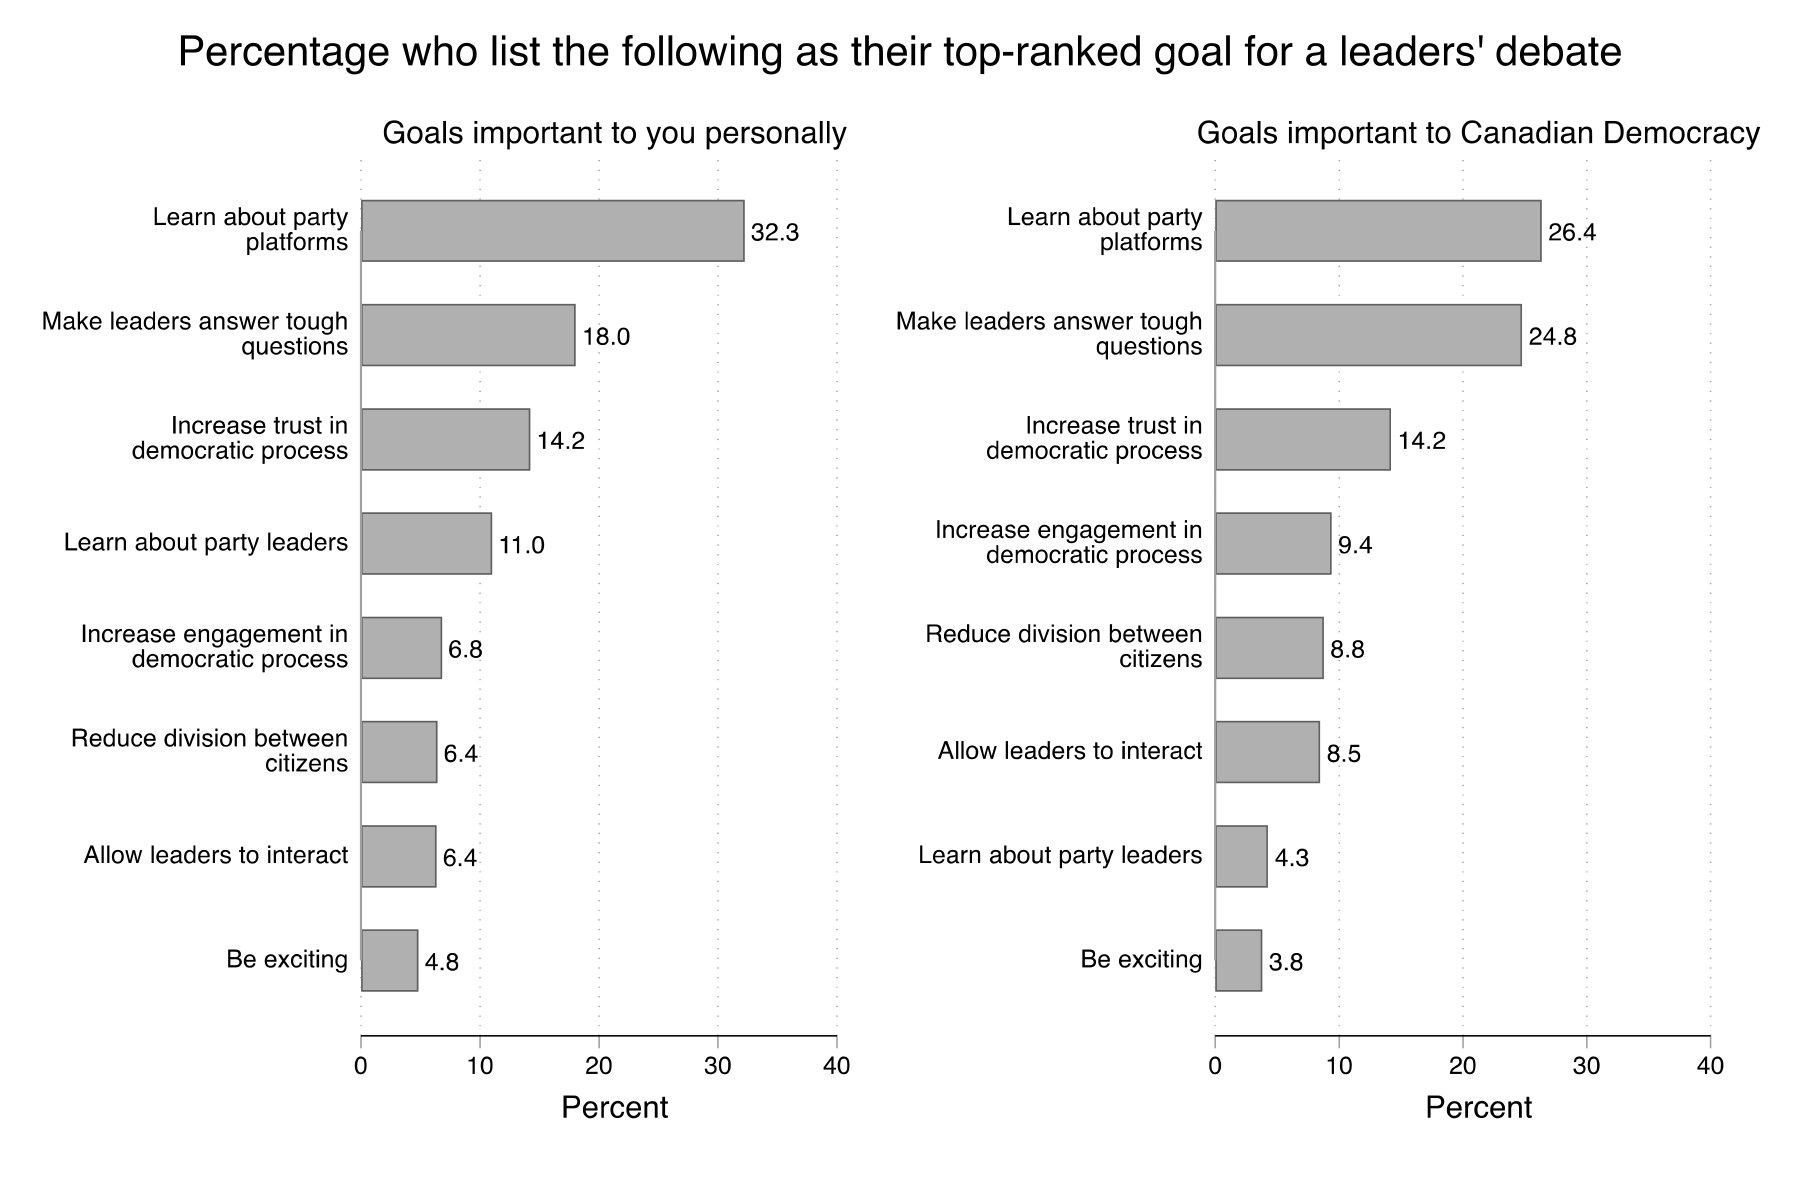 Figure 29
This figure shows participants' top-ranked preferences for a leaders' debate.  The left panel reports the responses of participants who were asked to think about which goals were important to them personally; the right panel reports the responses of participants who were asked to think about which goals were most important to Canadian democracy.  In both conditions, the most common top-ranked goals were:  Help citizens learn about the parties' platforms and promises; Make party leaders answer tough questions; and Increase citizens' trust in the democratic process.
